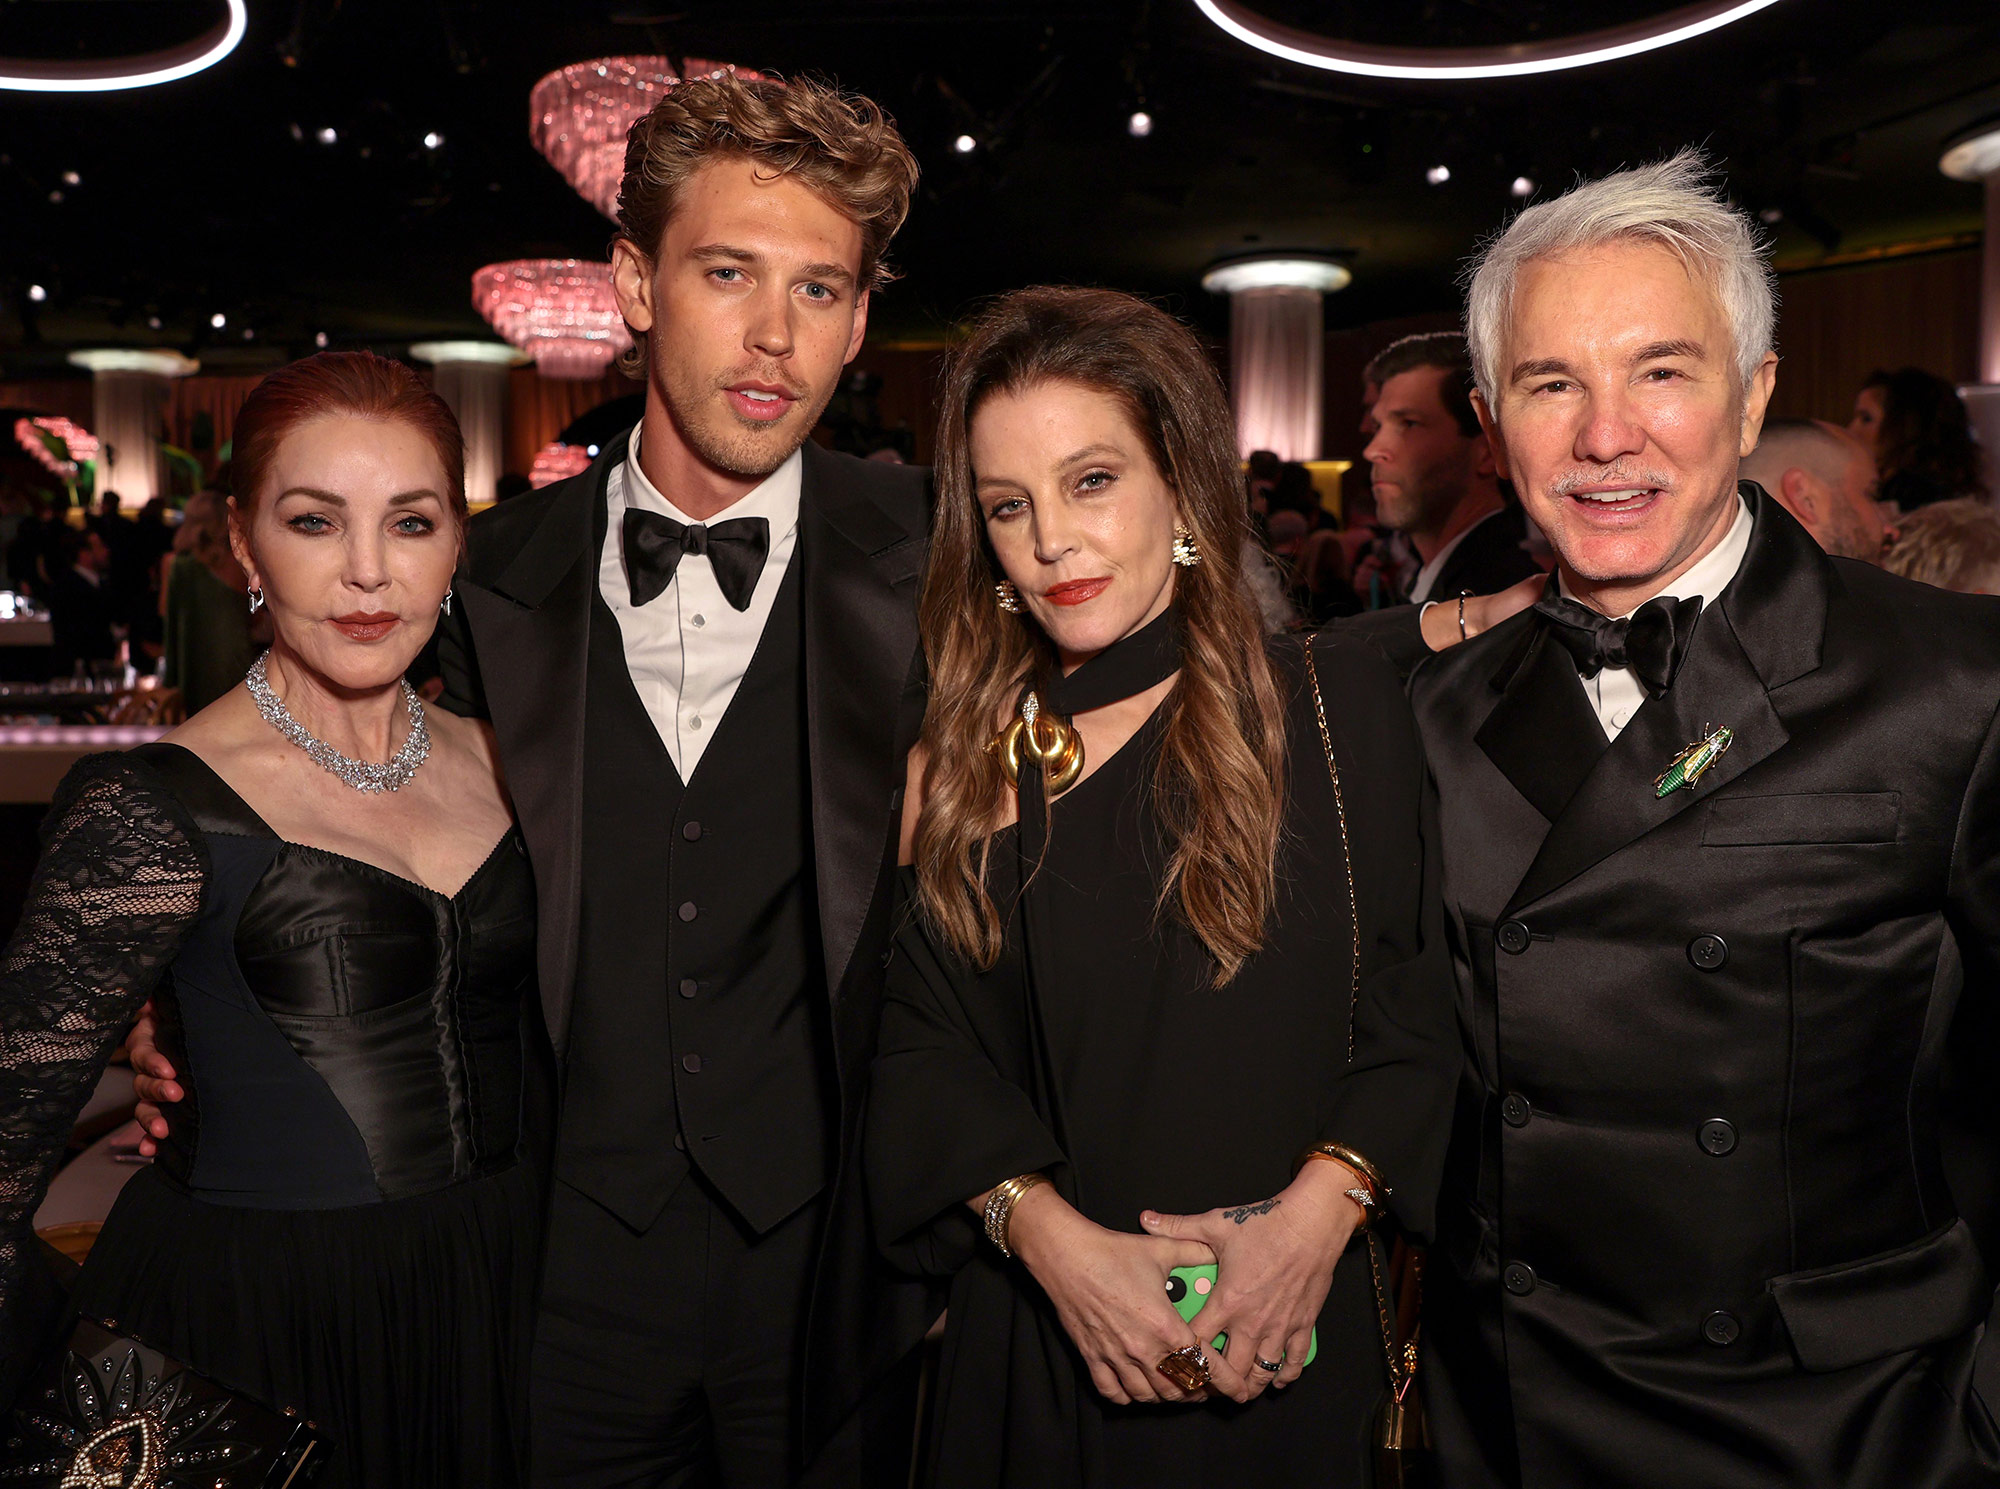 From left, Priscilla Presley, Austin Butler, Lisa Marie Presley and Baz Luhrmann attend the Golden Globe Awards on January 10.